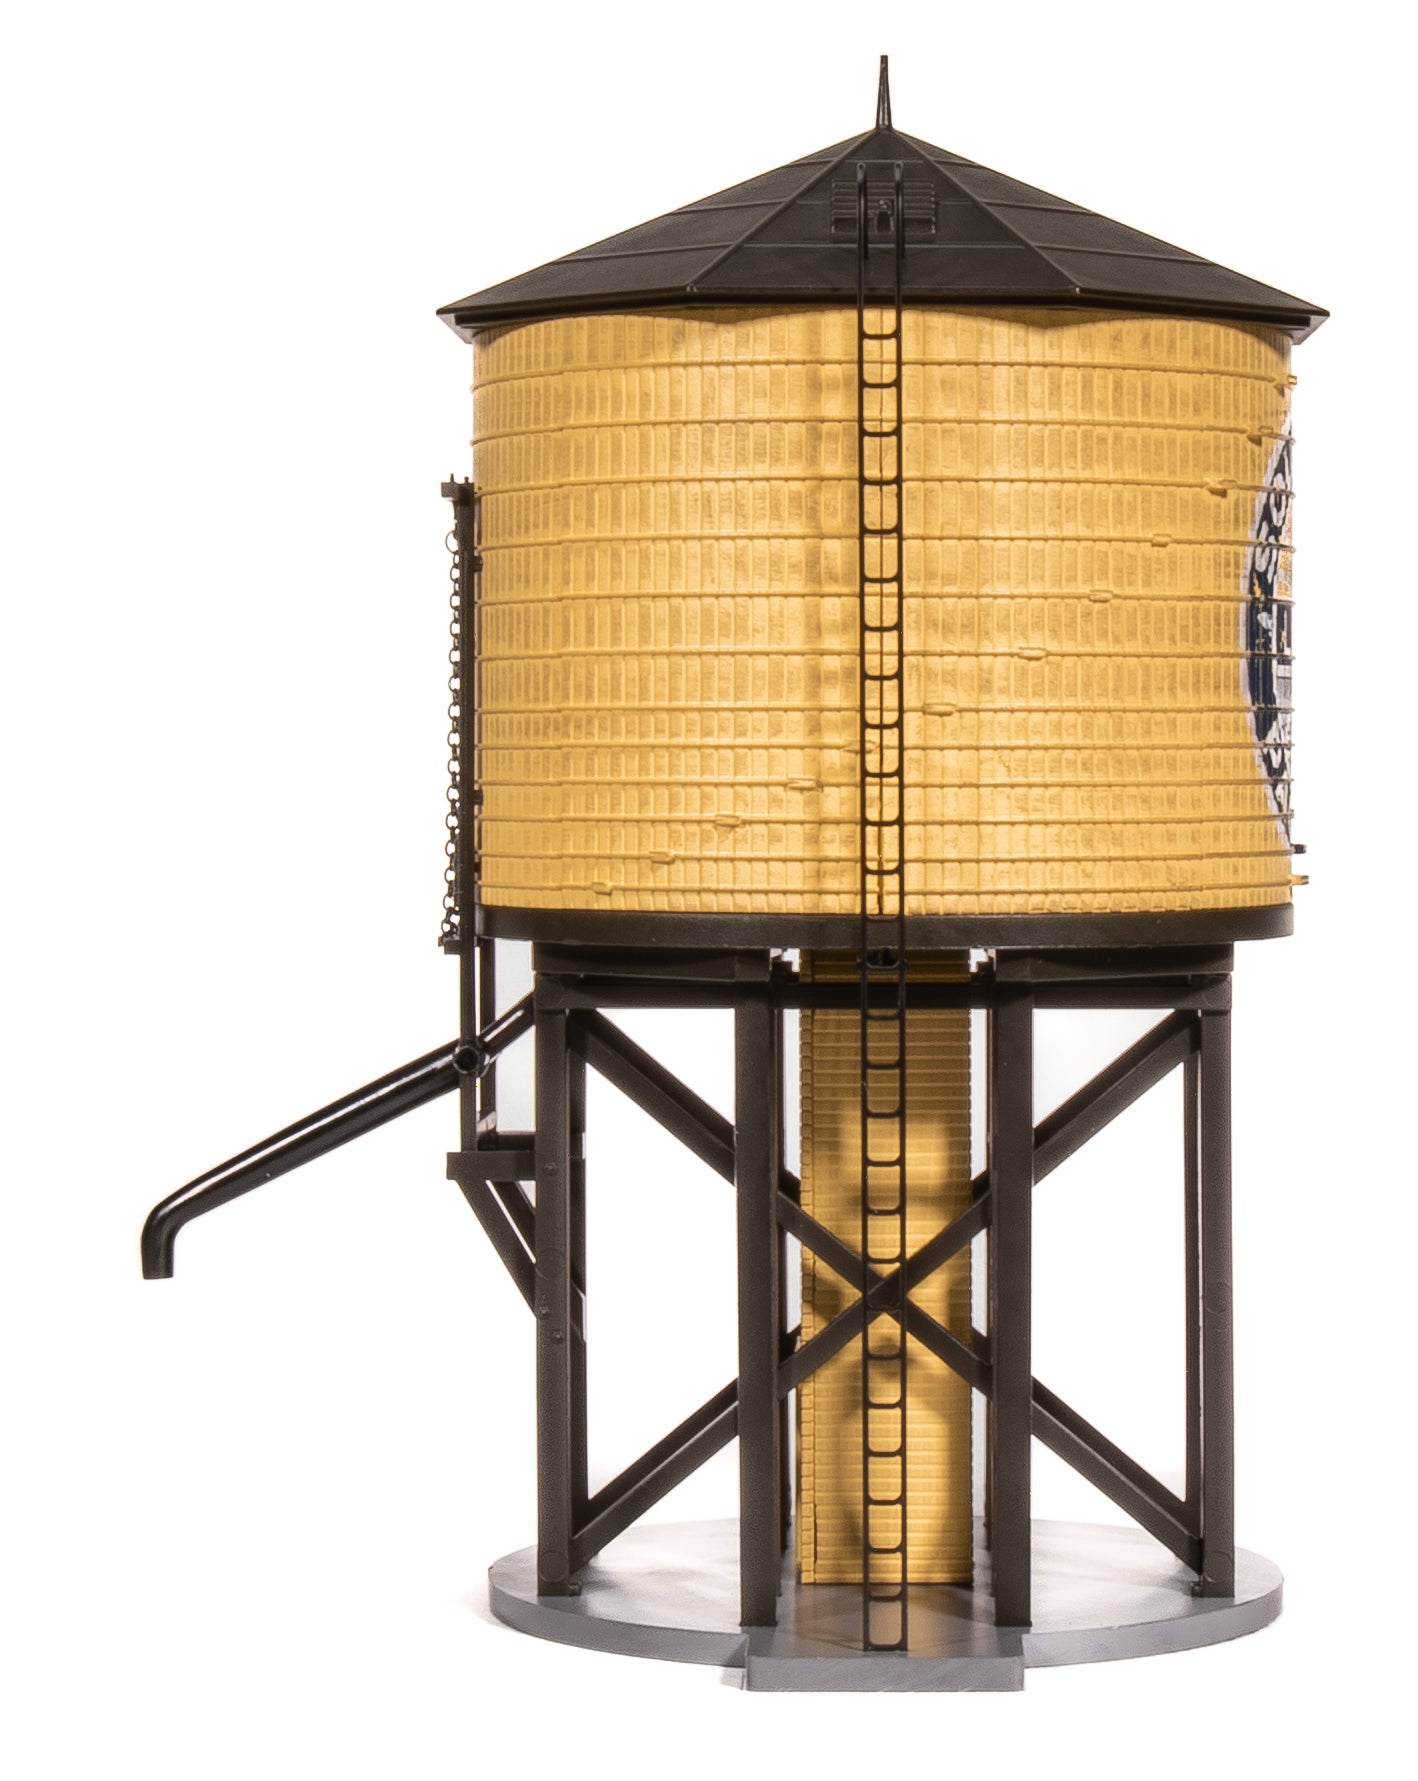 7923 Operating Water Tower w/ Sound, SP, Weathered, HO Default Title